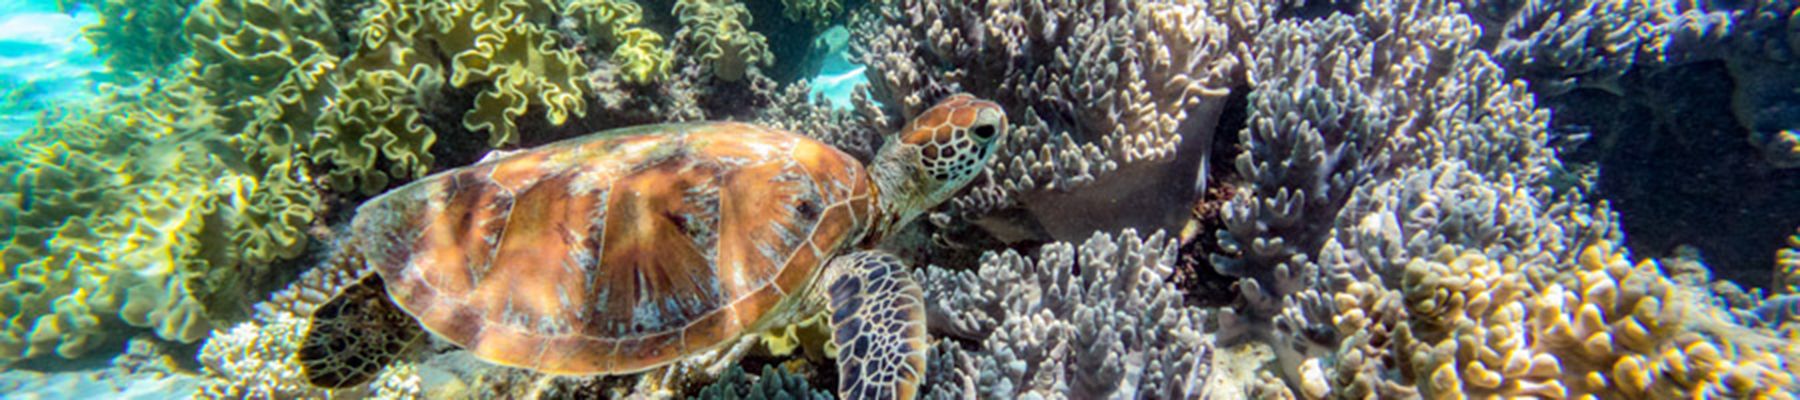 Turtle of the Great Barrier Reef swimming